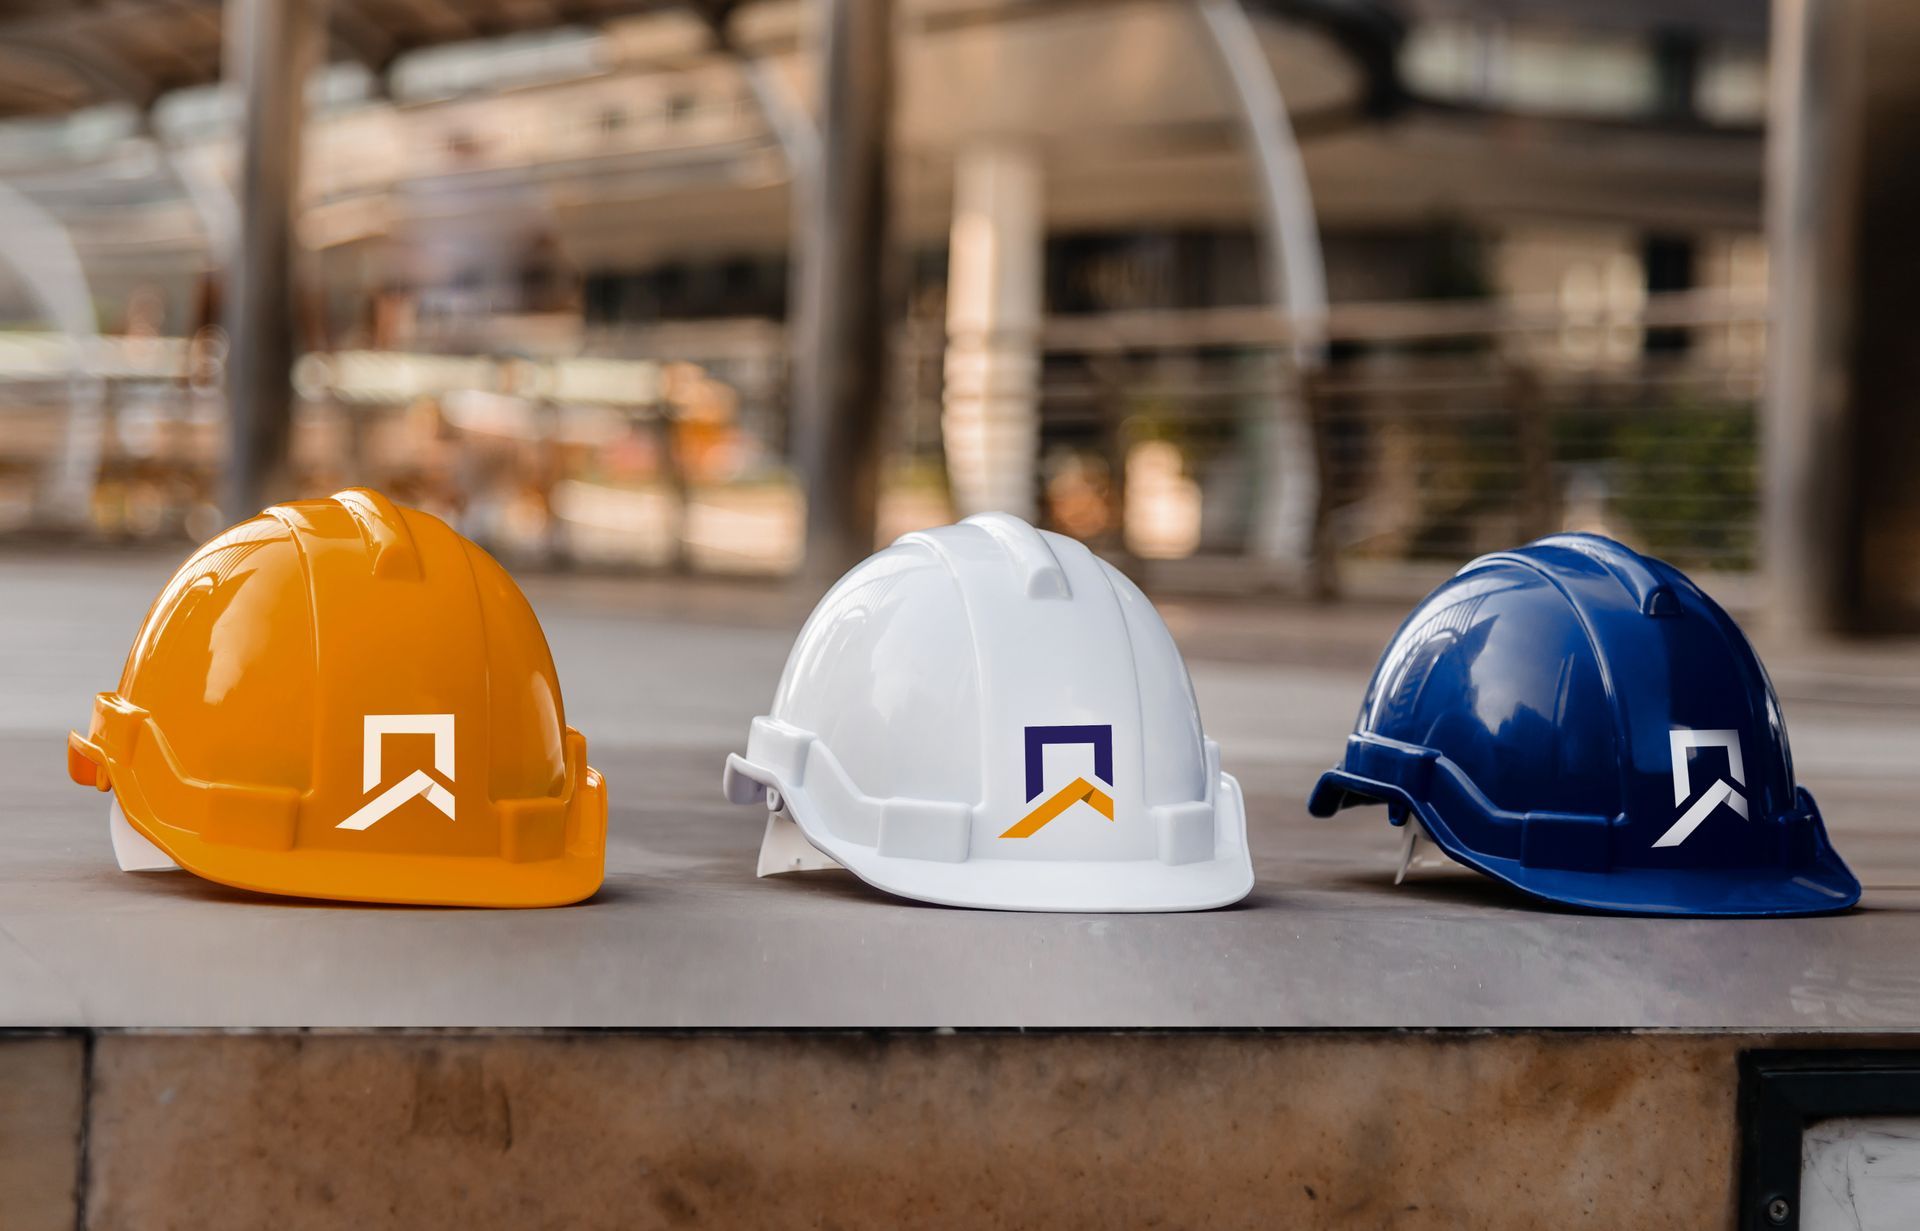 Three hard hats are sitting next to each other on a sidewalk.